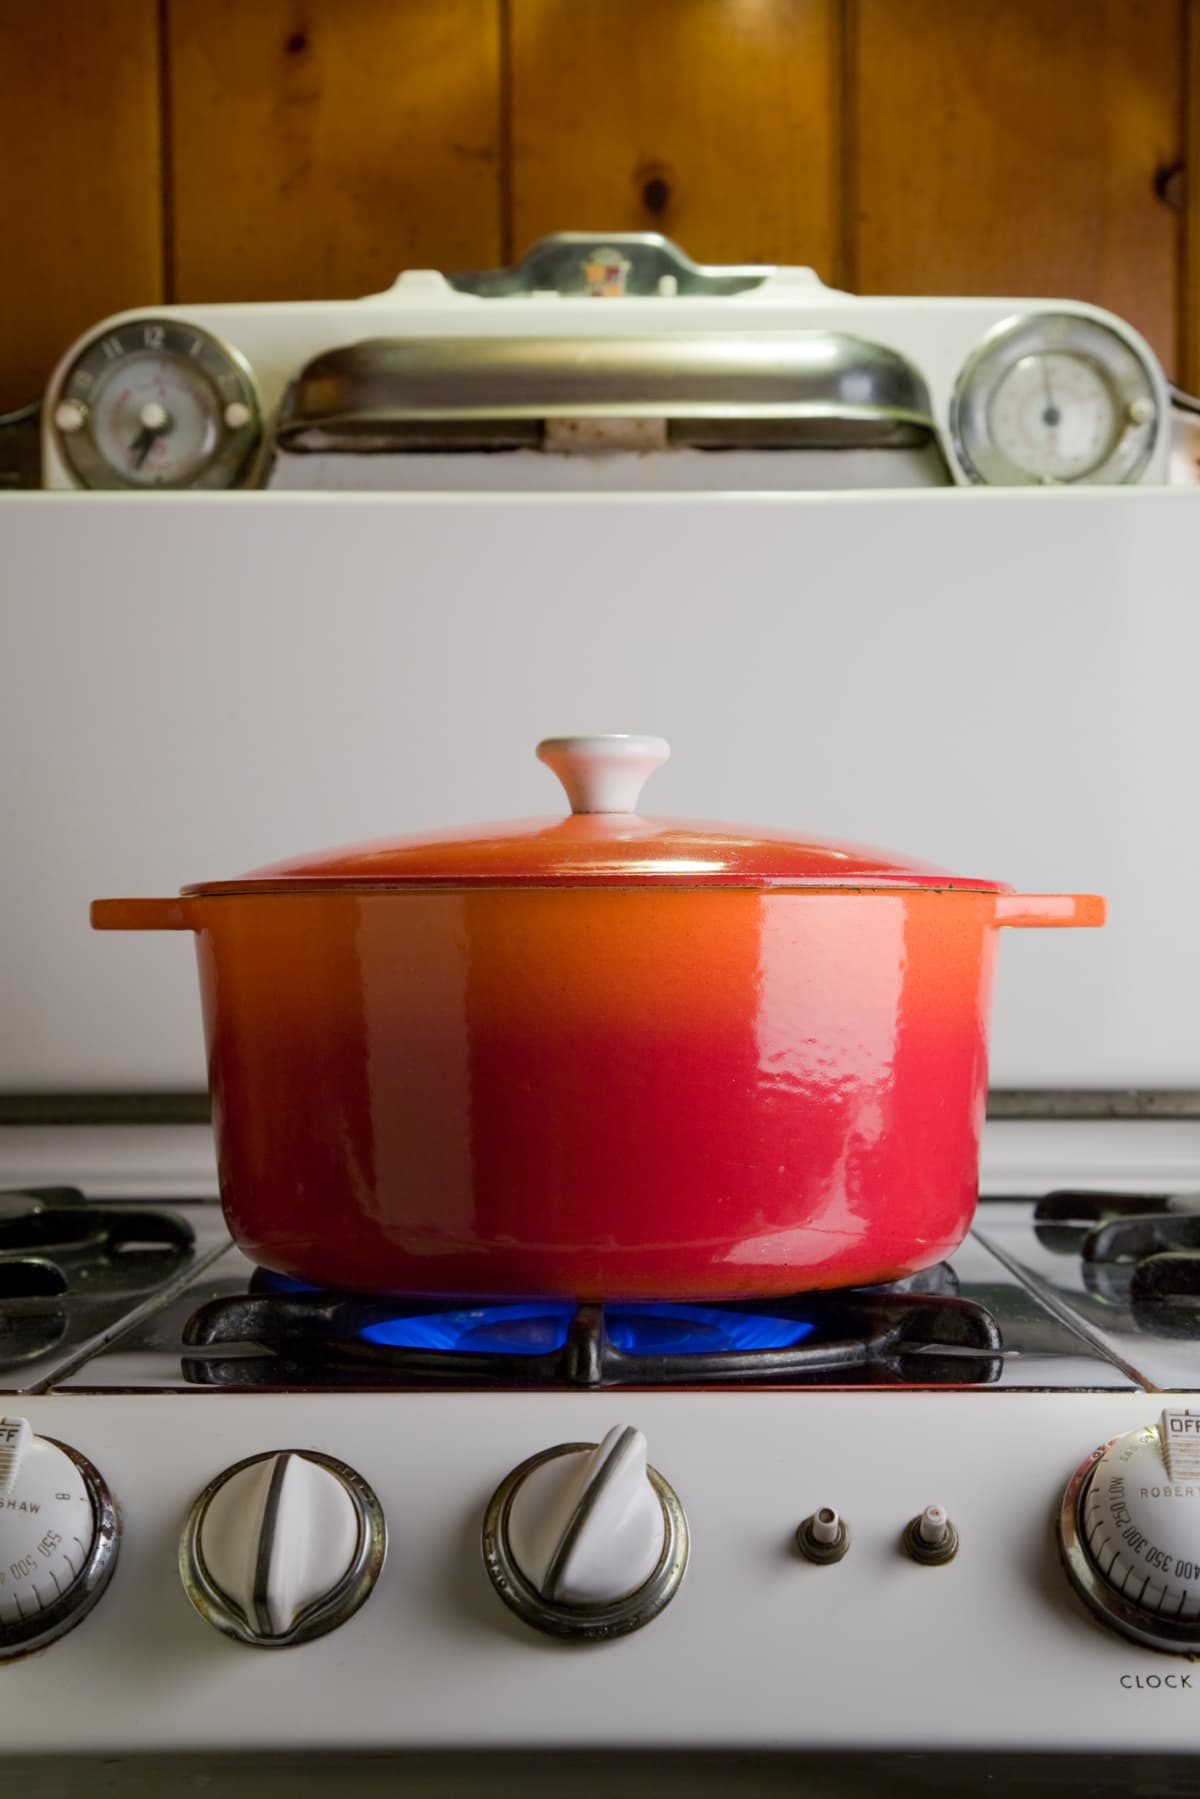 Red pot heating up on a stovetop